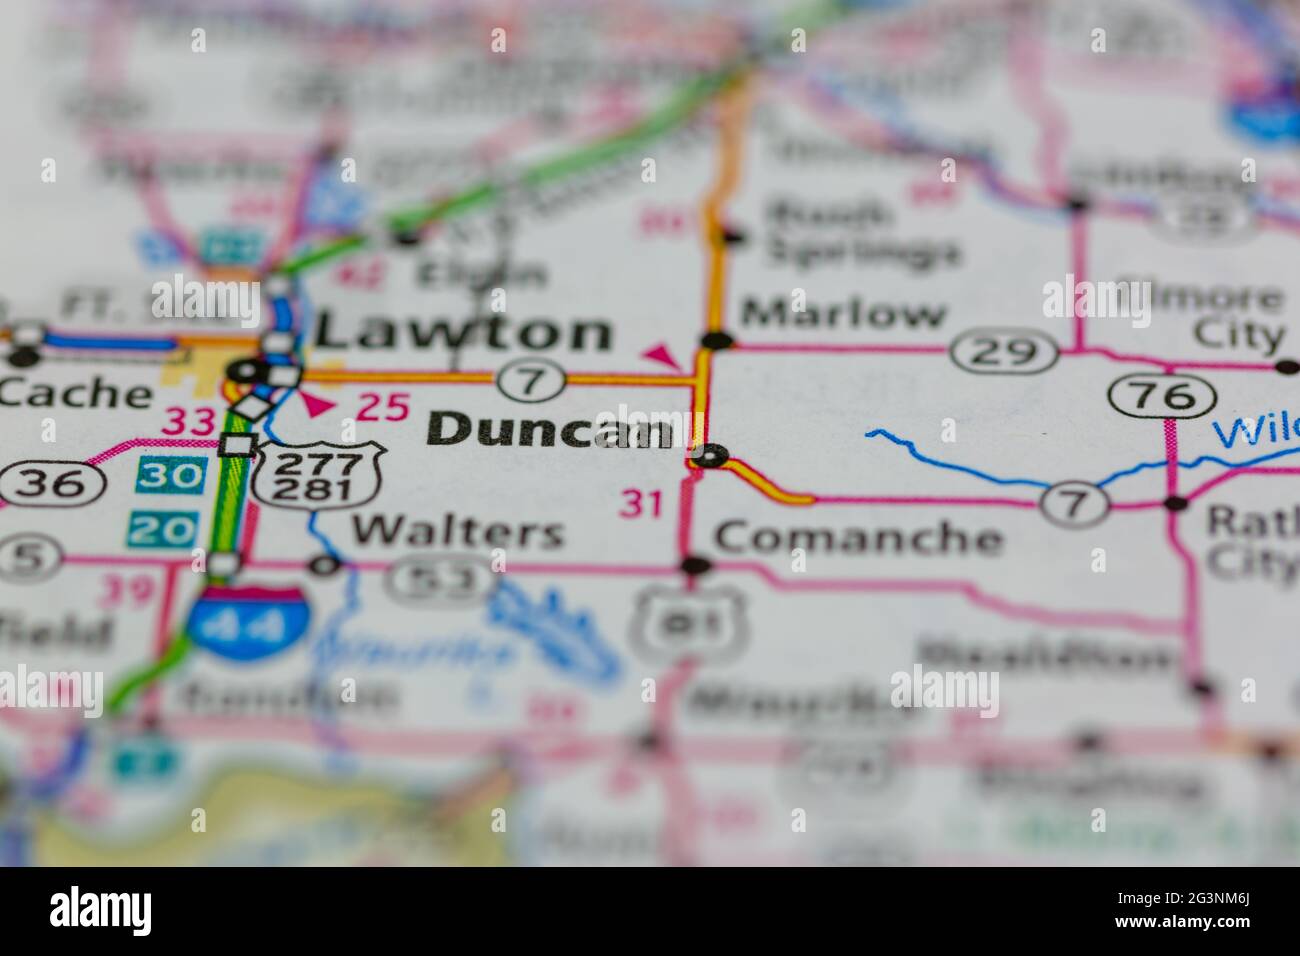 Duncan Oklahoma USA shown on a Geography map or road map Stock Photo